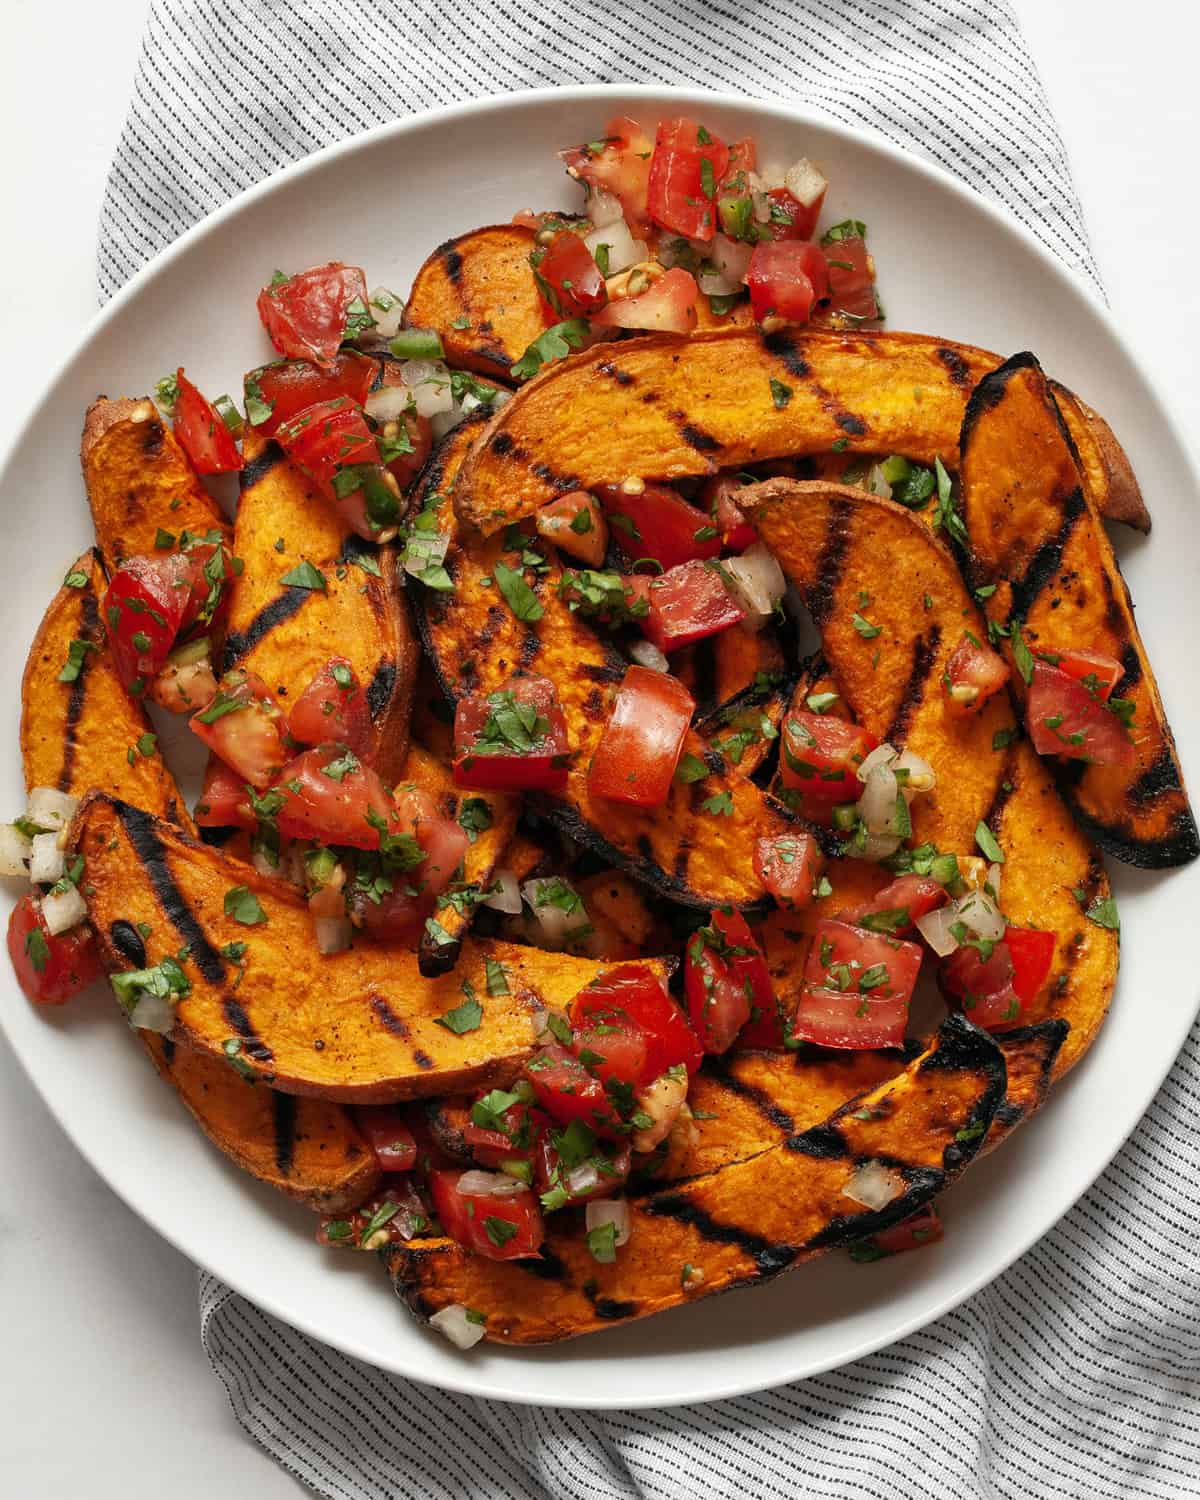 Grilled sweet potatoes topped with pico de gallo.